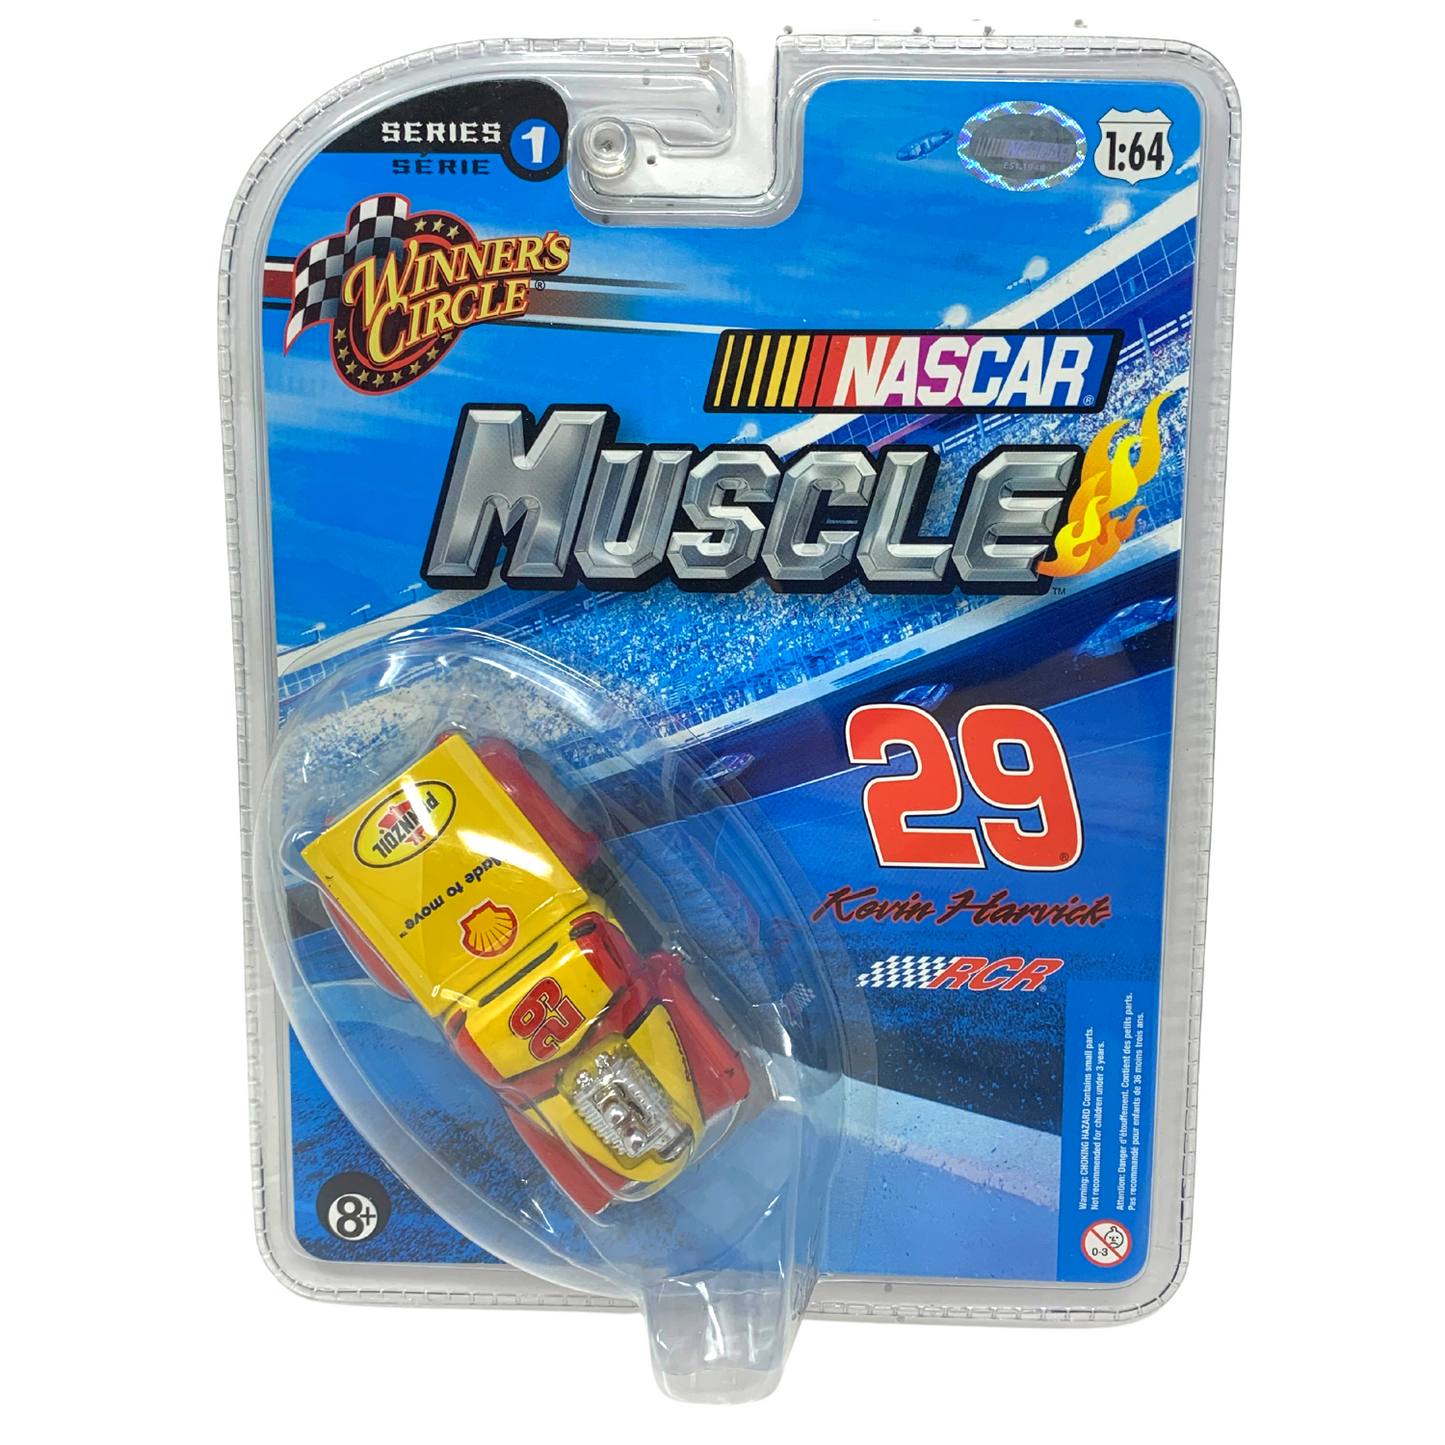 Winner's Circle Nascar Muscle #29 Kevin Harvick Shell Truck 1:64 Diecast